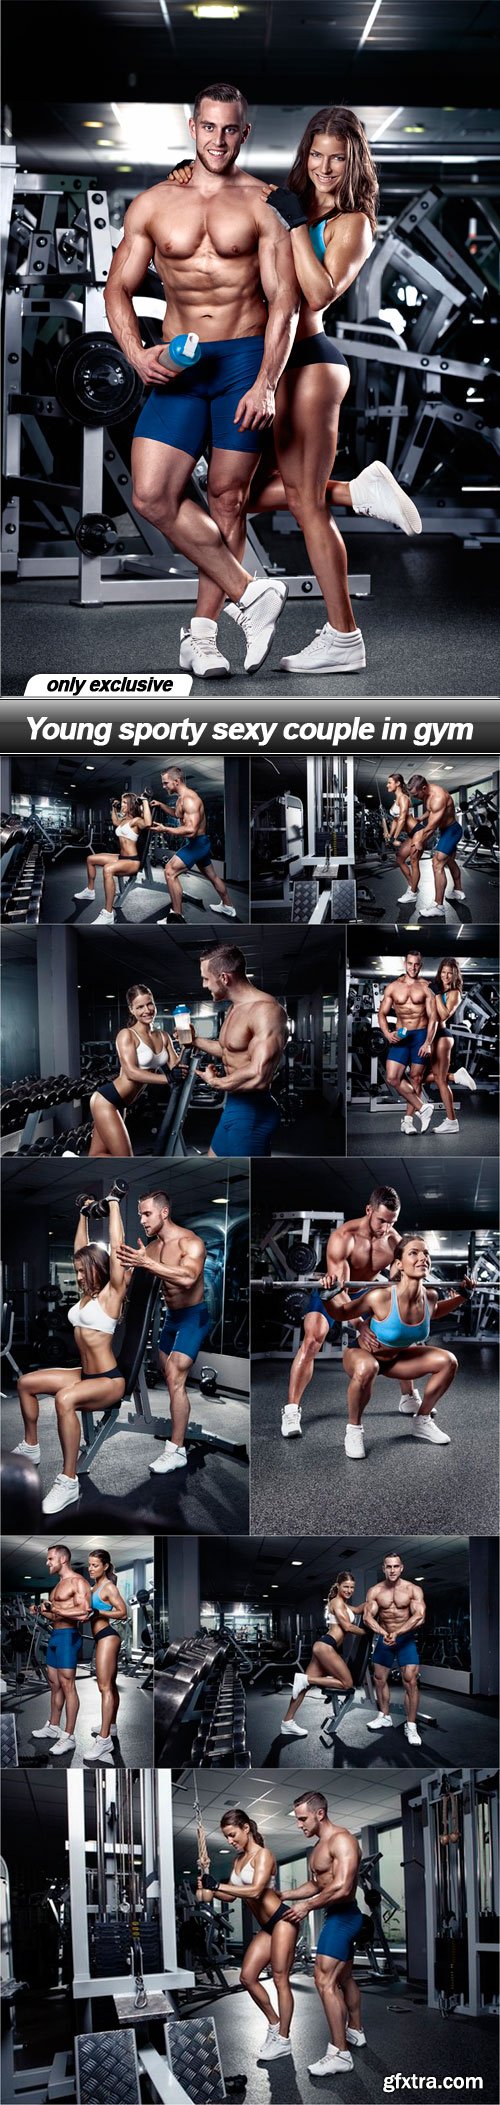 Young sporty sexy couple in gym - 9 UHQ JPEG